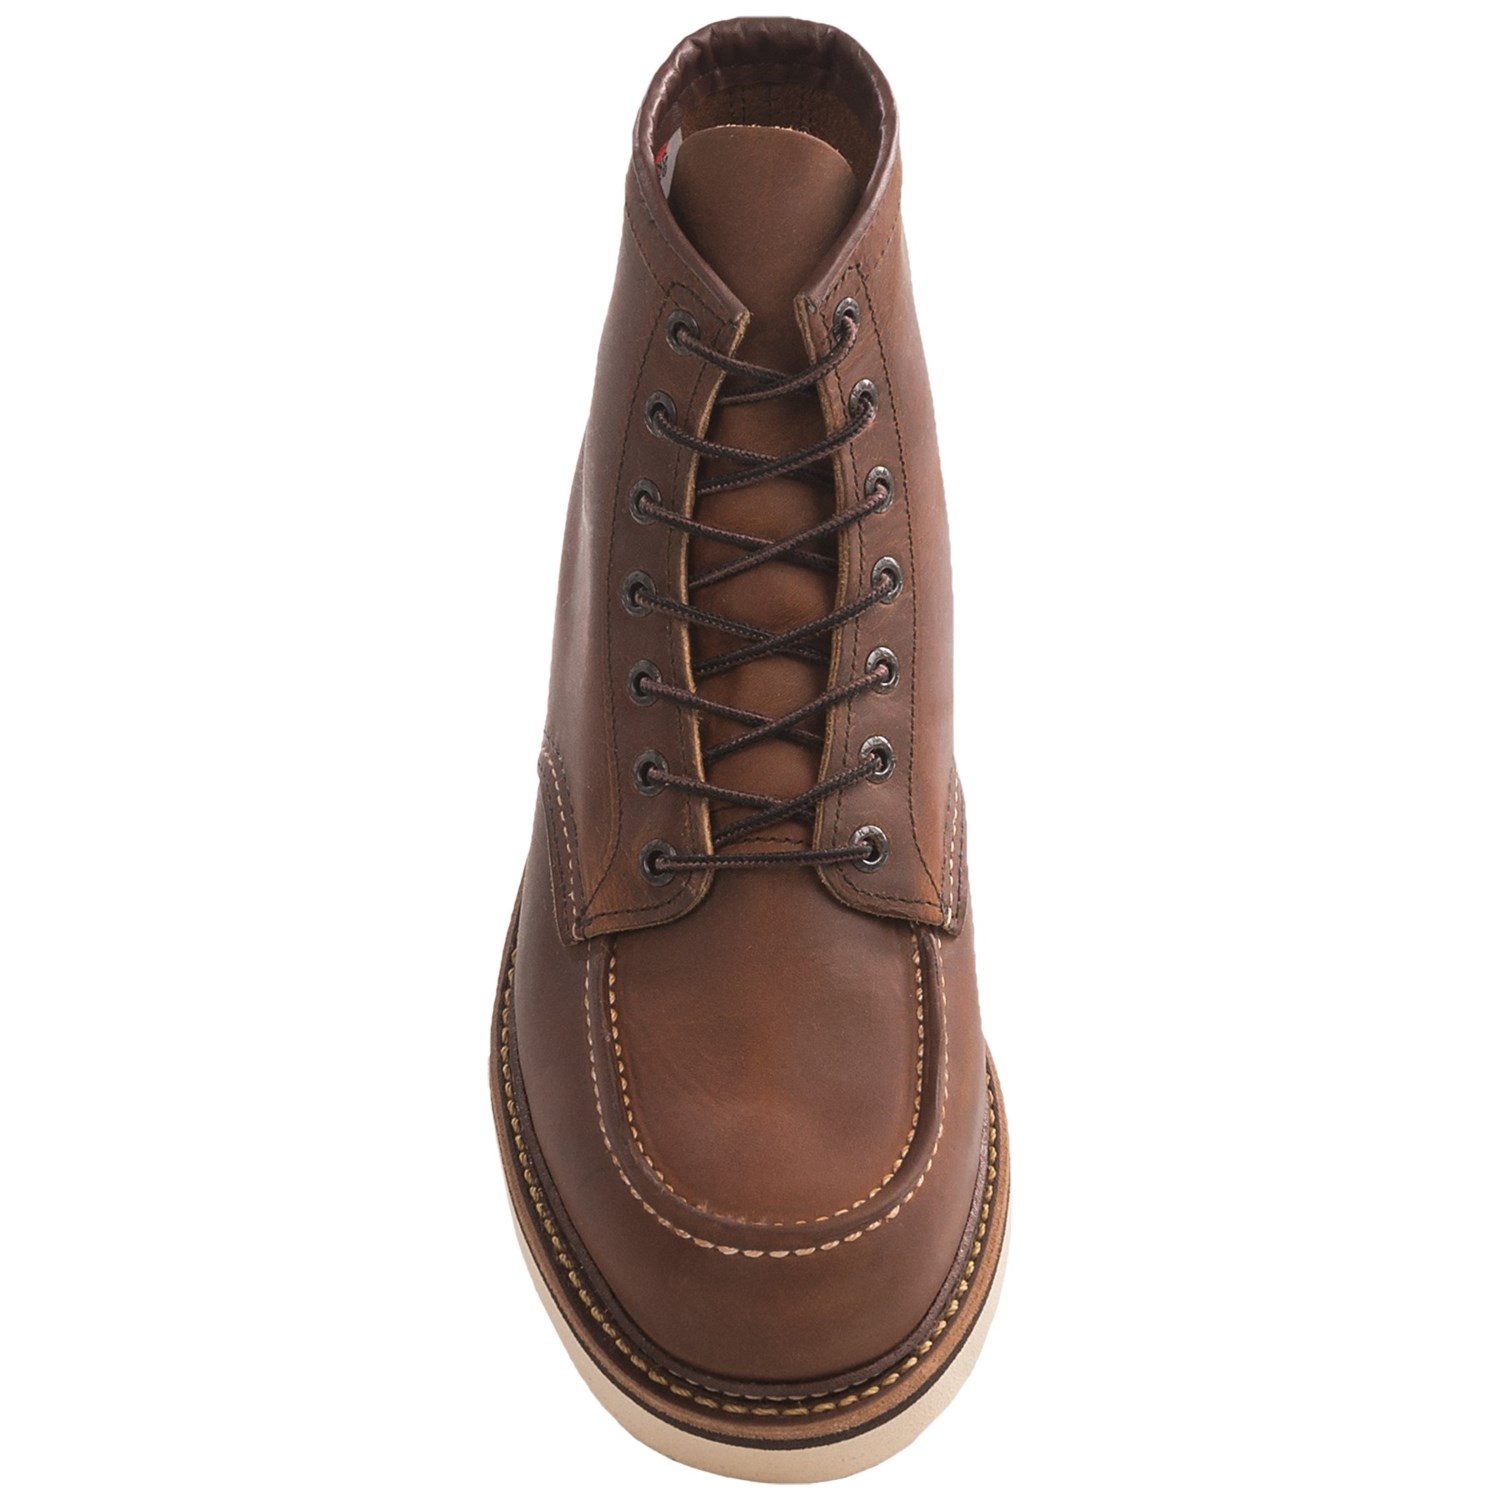 Red Wing Shoes Red Wing Heritage 1907 6” Moc-Toe Boots (For Men) - Save 35%